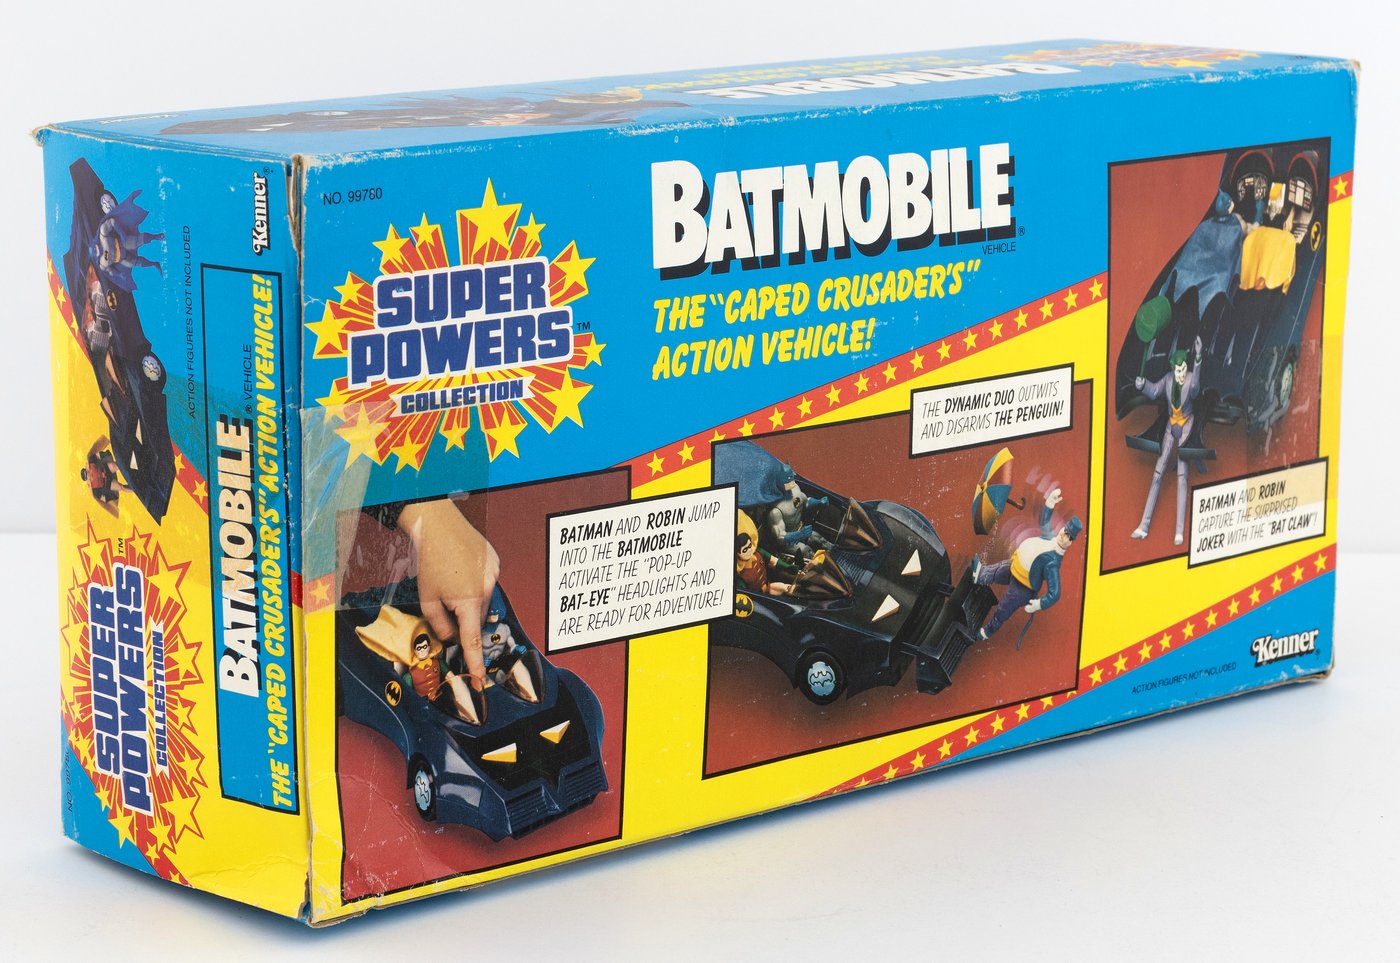 Hake's "SUPER POWERS COLLECTION BATMOBILE" BOXED VEHICLE.